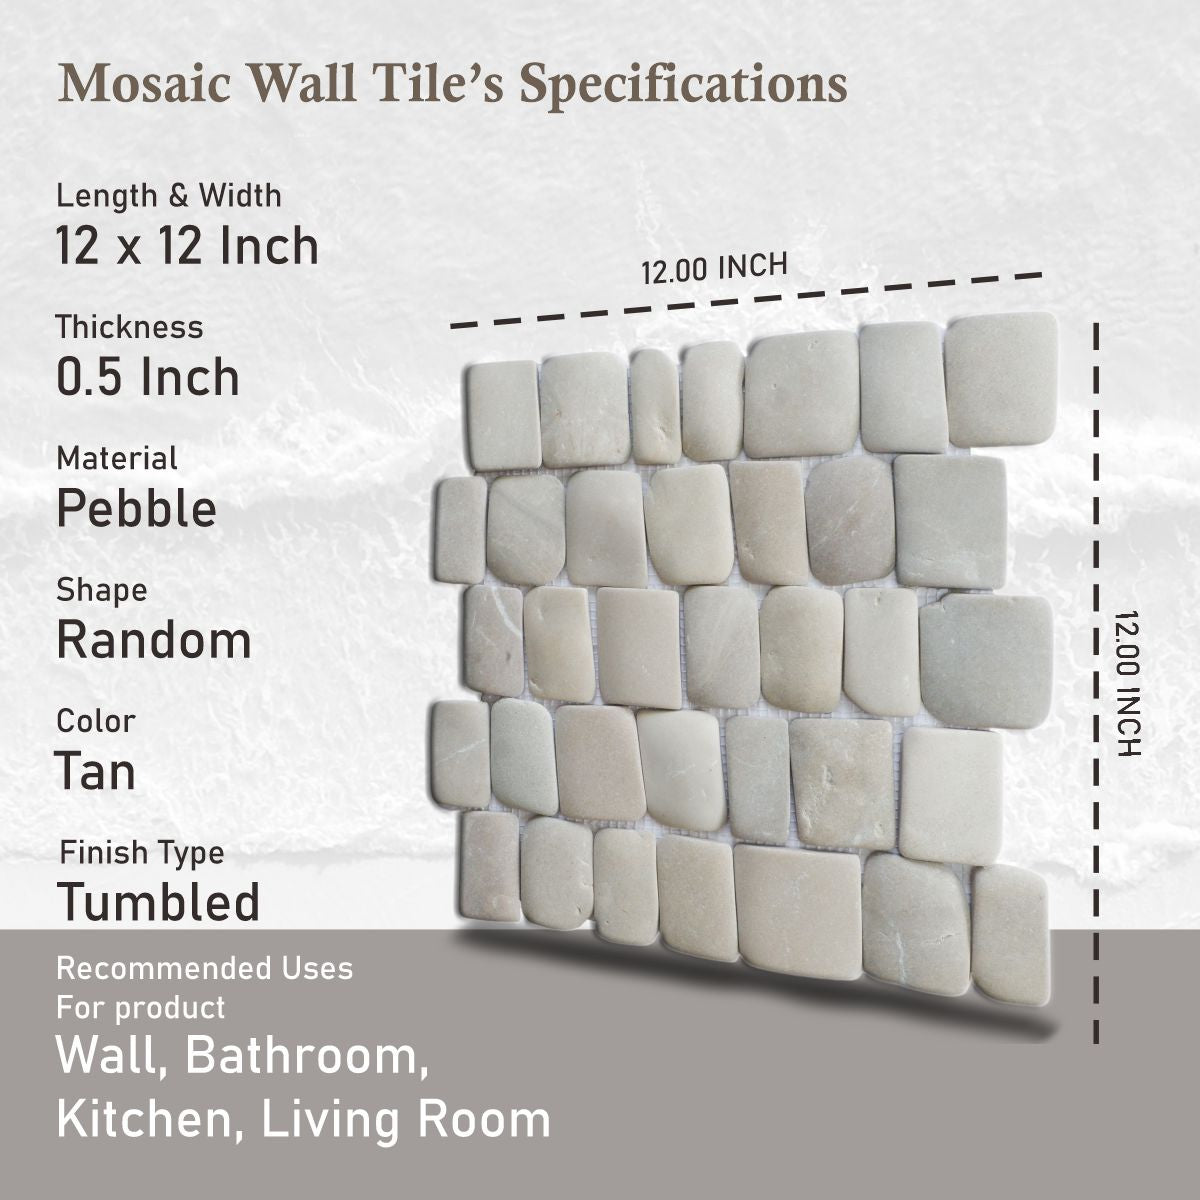 Tan Stone Mosaic Tile for Wall and Floor, Canine Natural Stone Tile